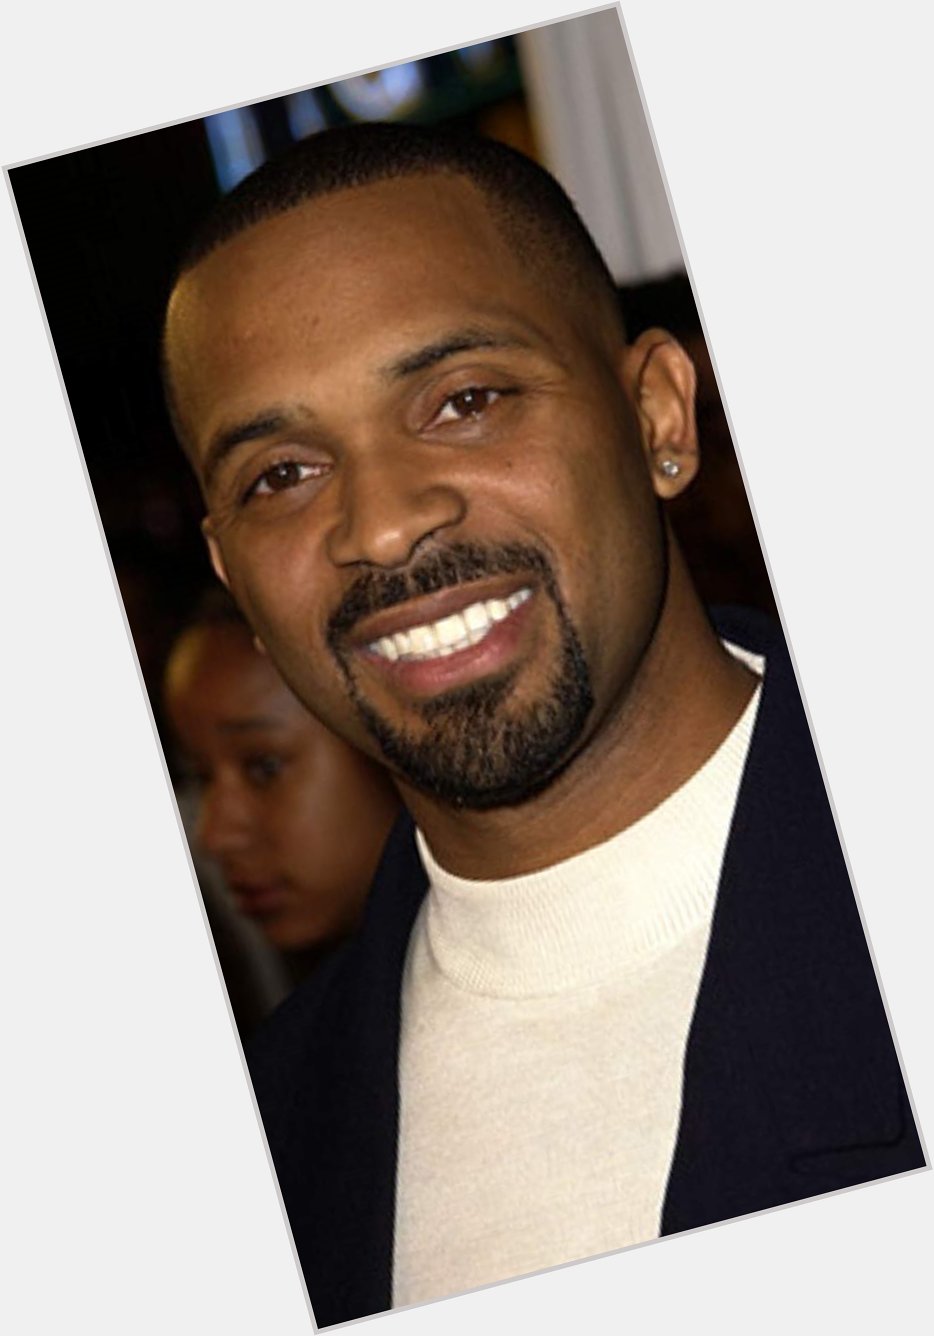 HAPPY BIRTHDAY TO ACTOR & COMEDIAN MIKE EPPS! THANKS FOR THE LAUGHS! 